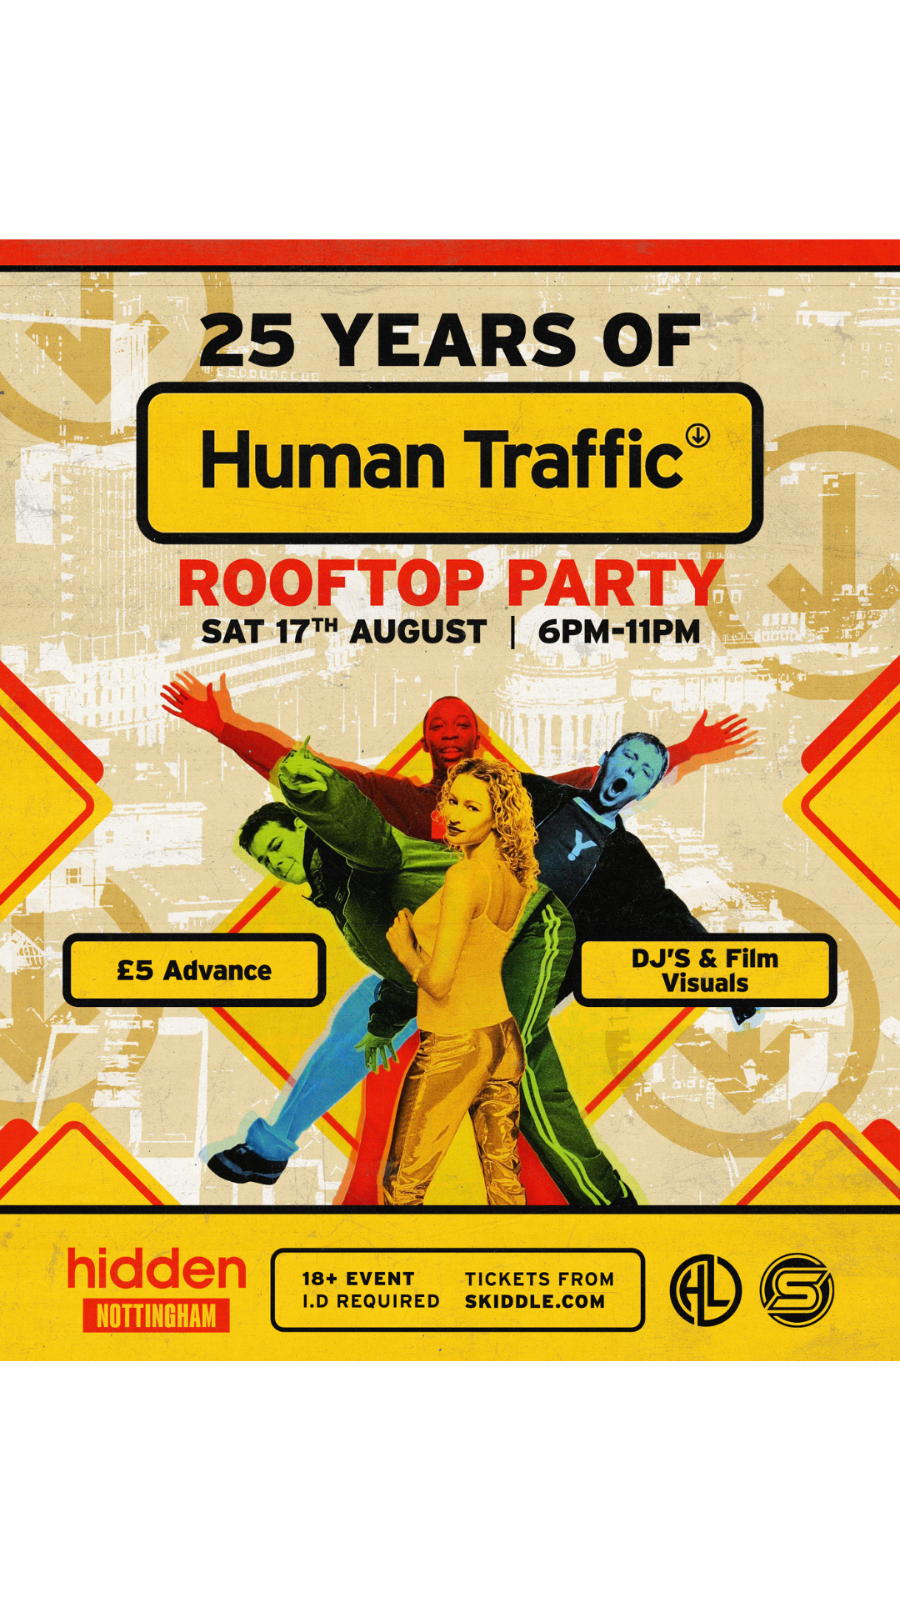 25 YEARS OF HUMAN TRAFFIC ROOFTOP PARTY